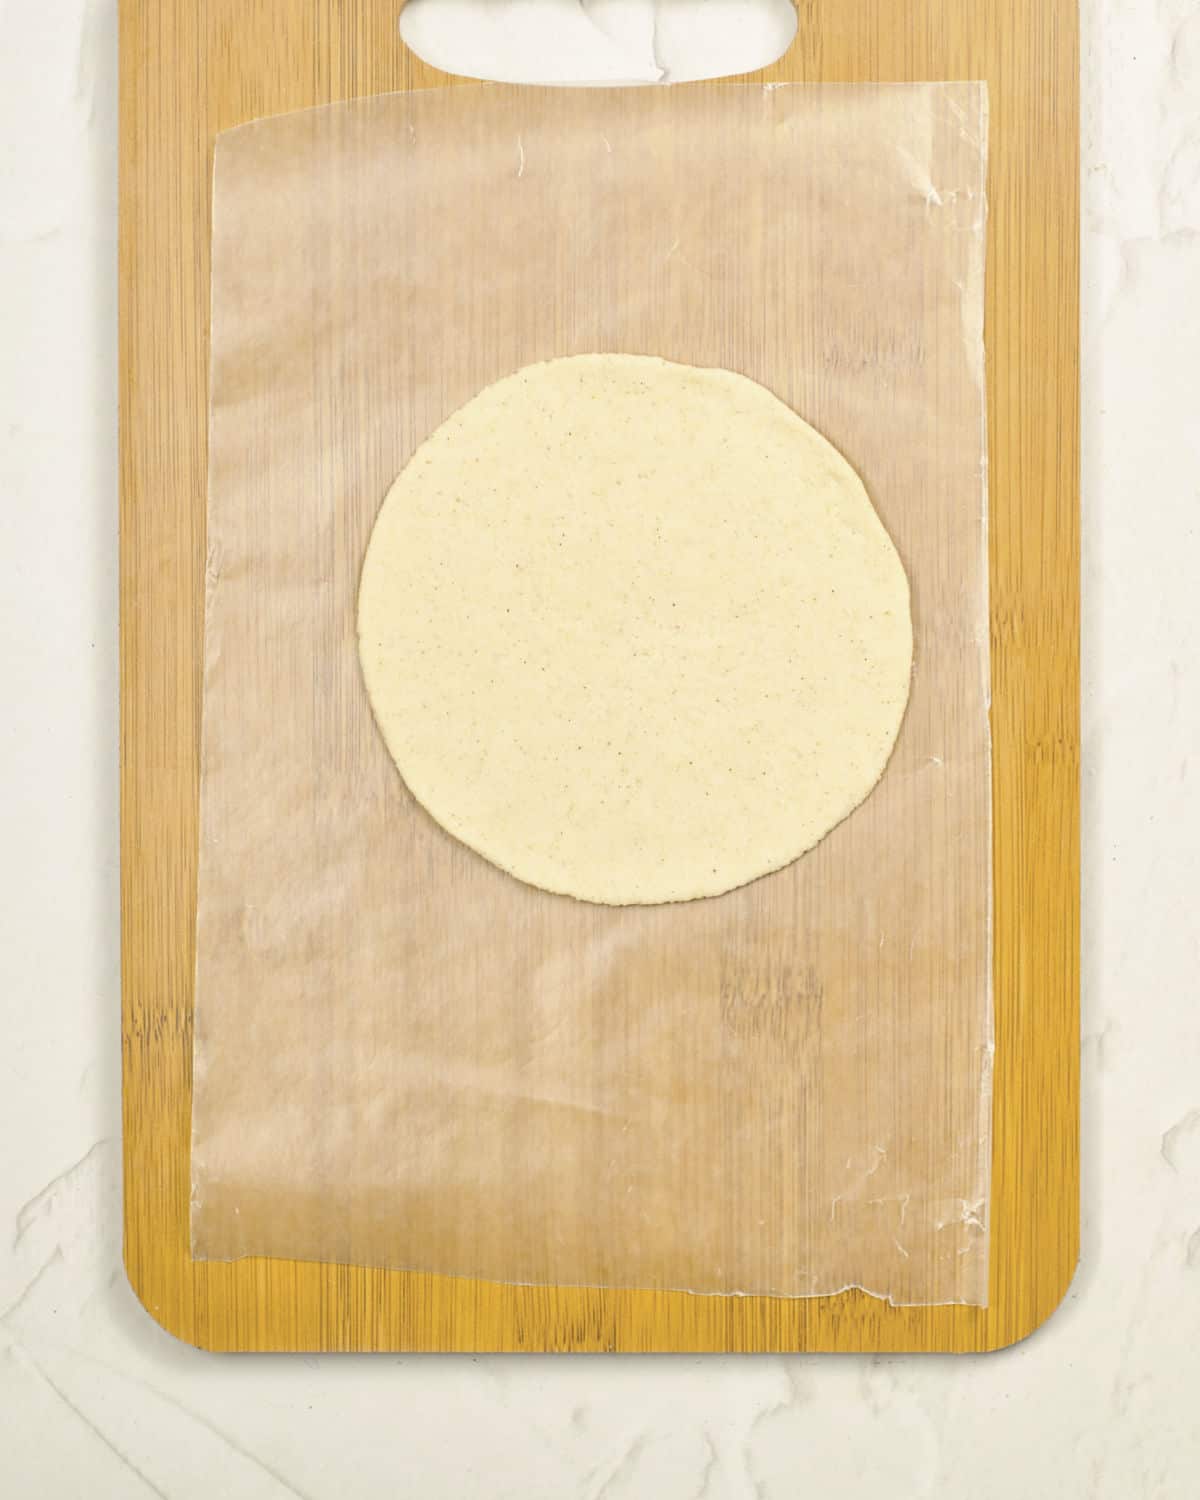 Rolled corn tortilla on wax paper set on a wooden board. Light grey surface. 